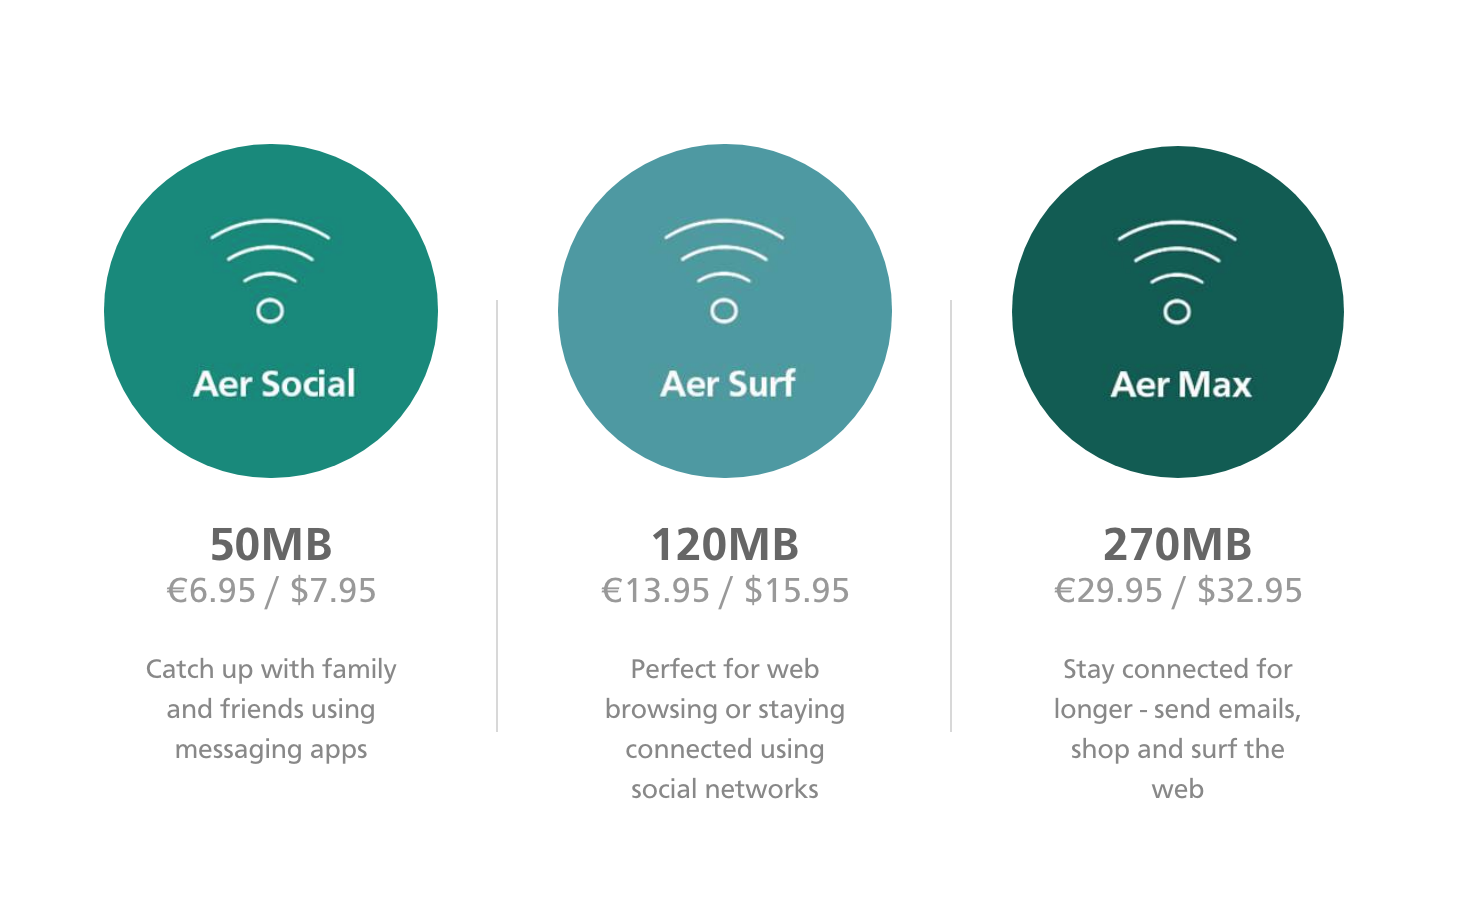 Aer Lingus's current Wi-Fi plans—only available on their Airbus A330. 